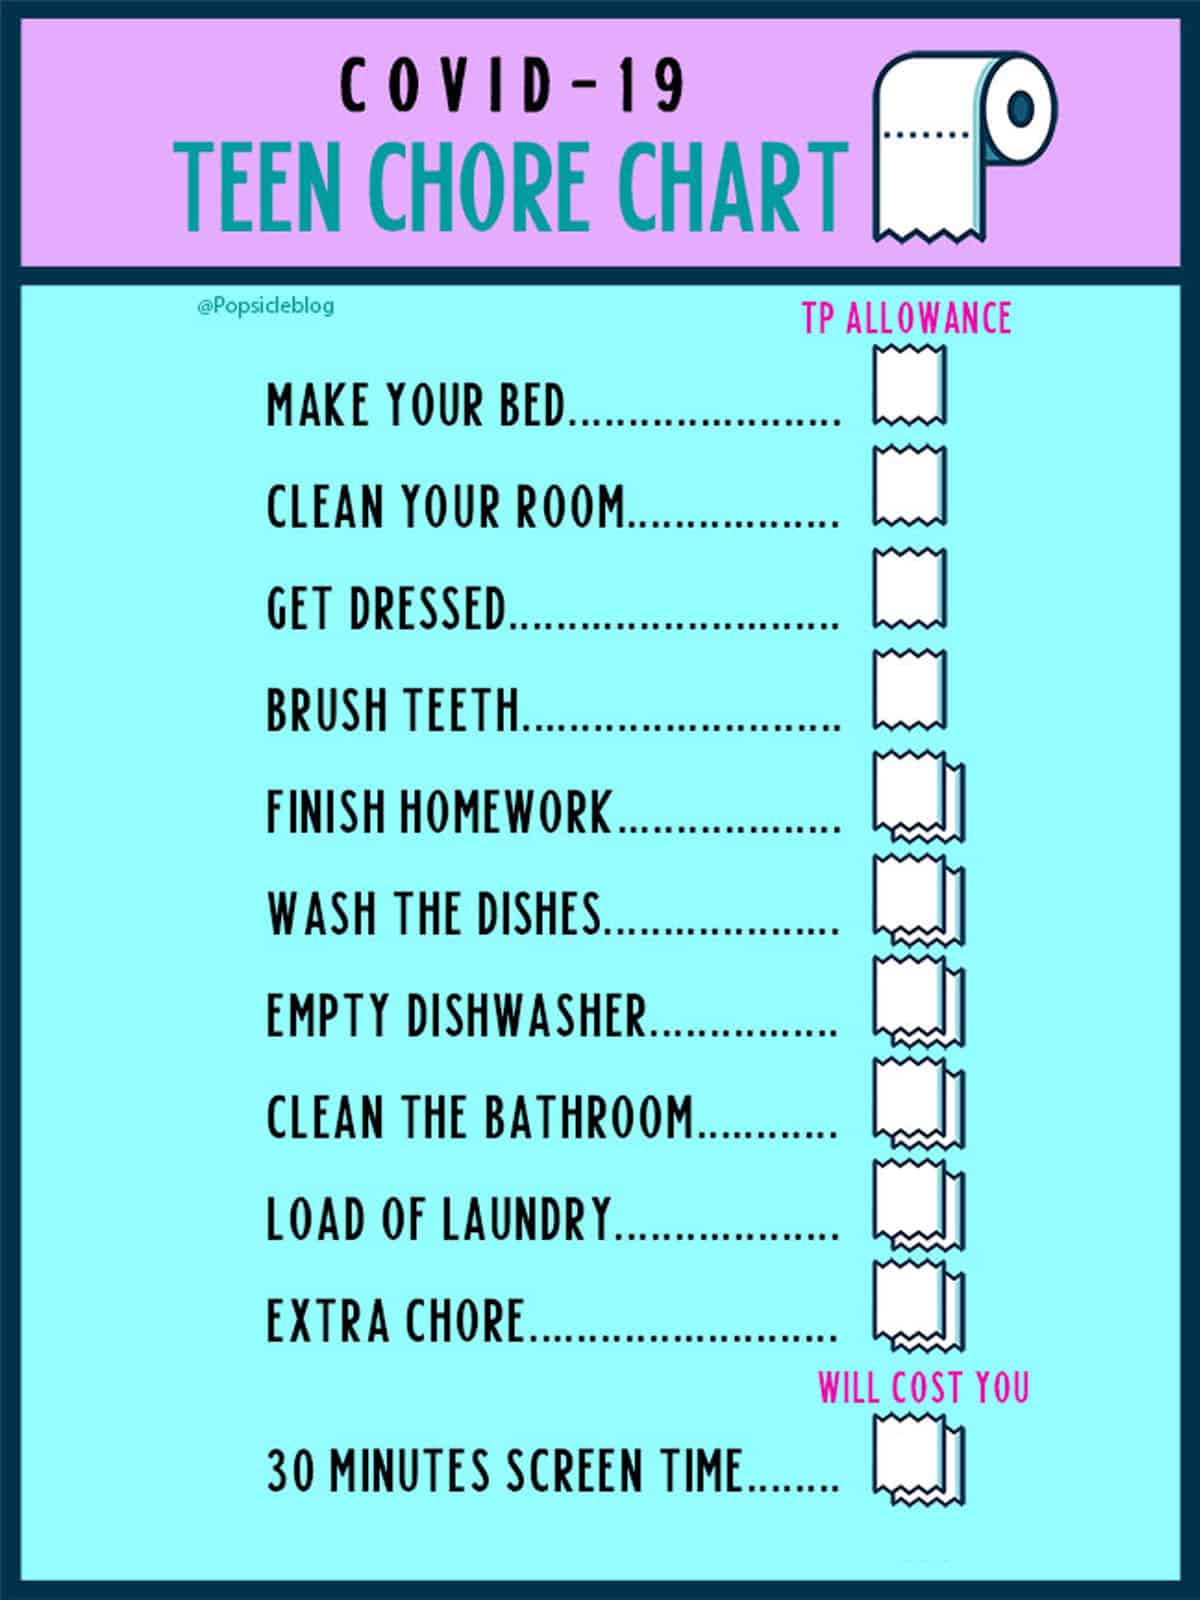 motivate-teens-to-do-their-chores-during-the-covid-19-outbreak-popsicle-blog